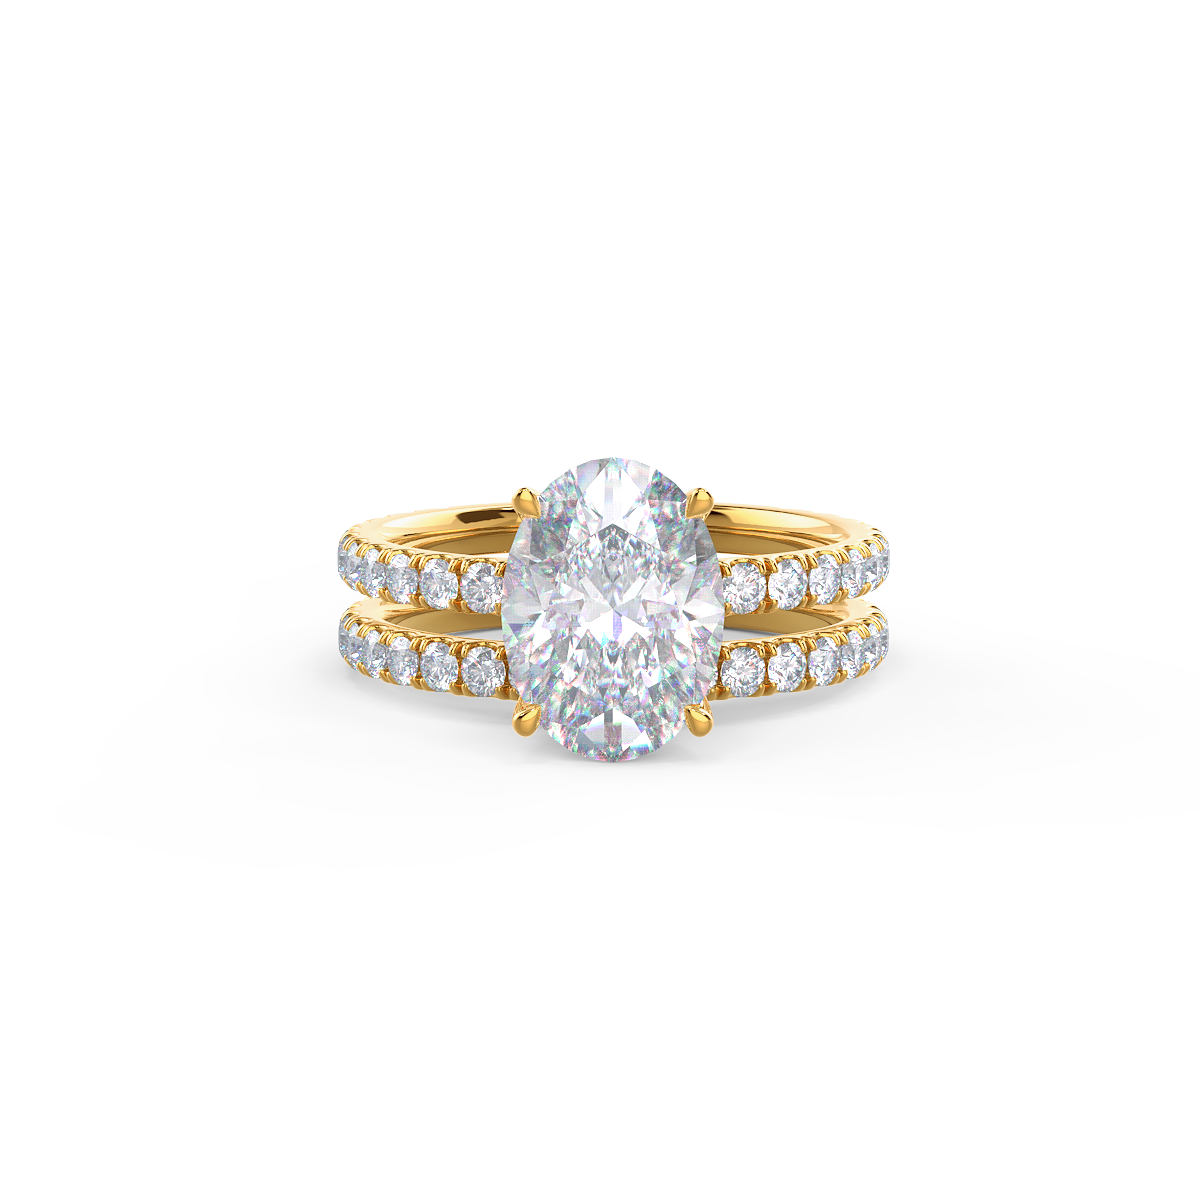  This setting pairs with several wedding band styles.    View Wedding Band Details   